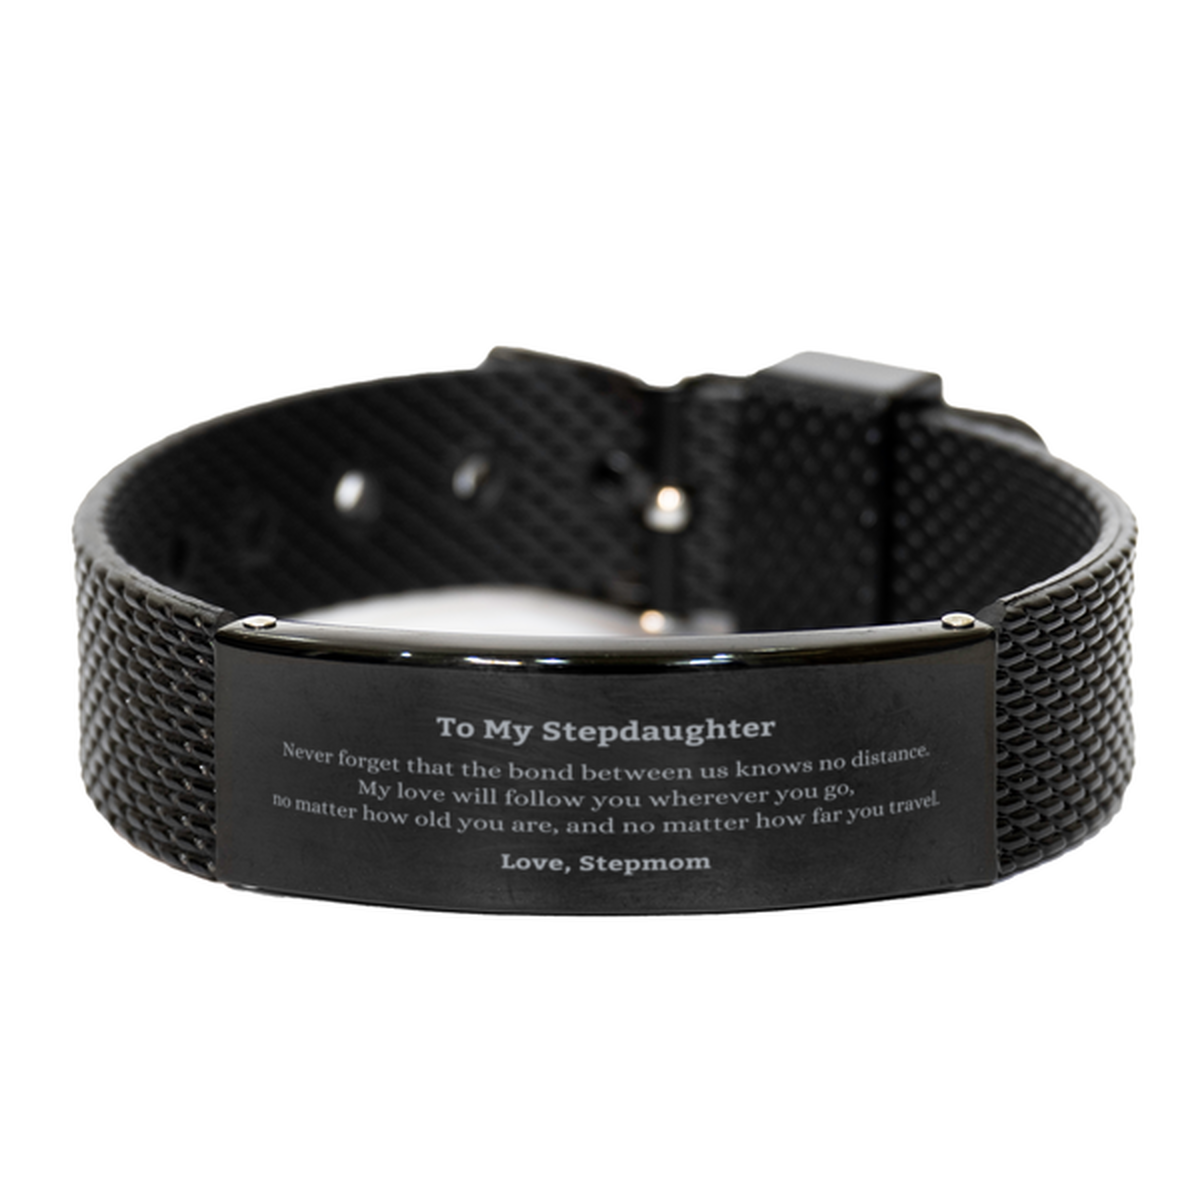 Stepdaughter Birthday Gifts from Stepmom, Adjustable Black Shark Mesh Bracelet for Stepdaughter Christmas Graduation Unique Gifts Stepdaughter Never forget that the bond between us knows no distance. Love, Stepmom